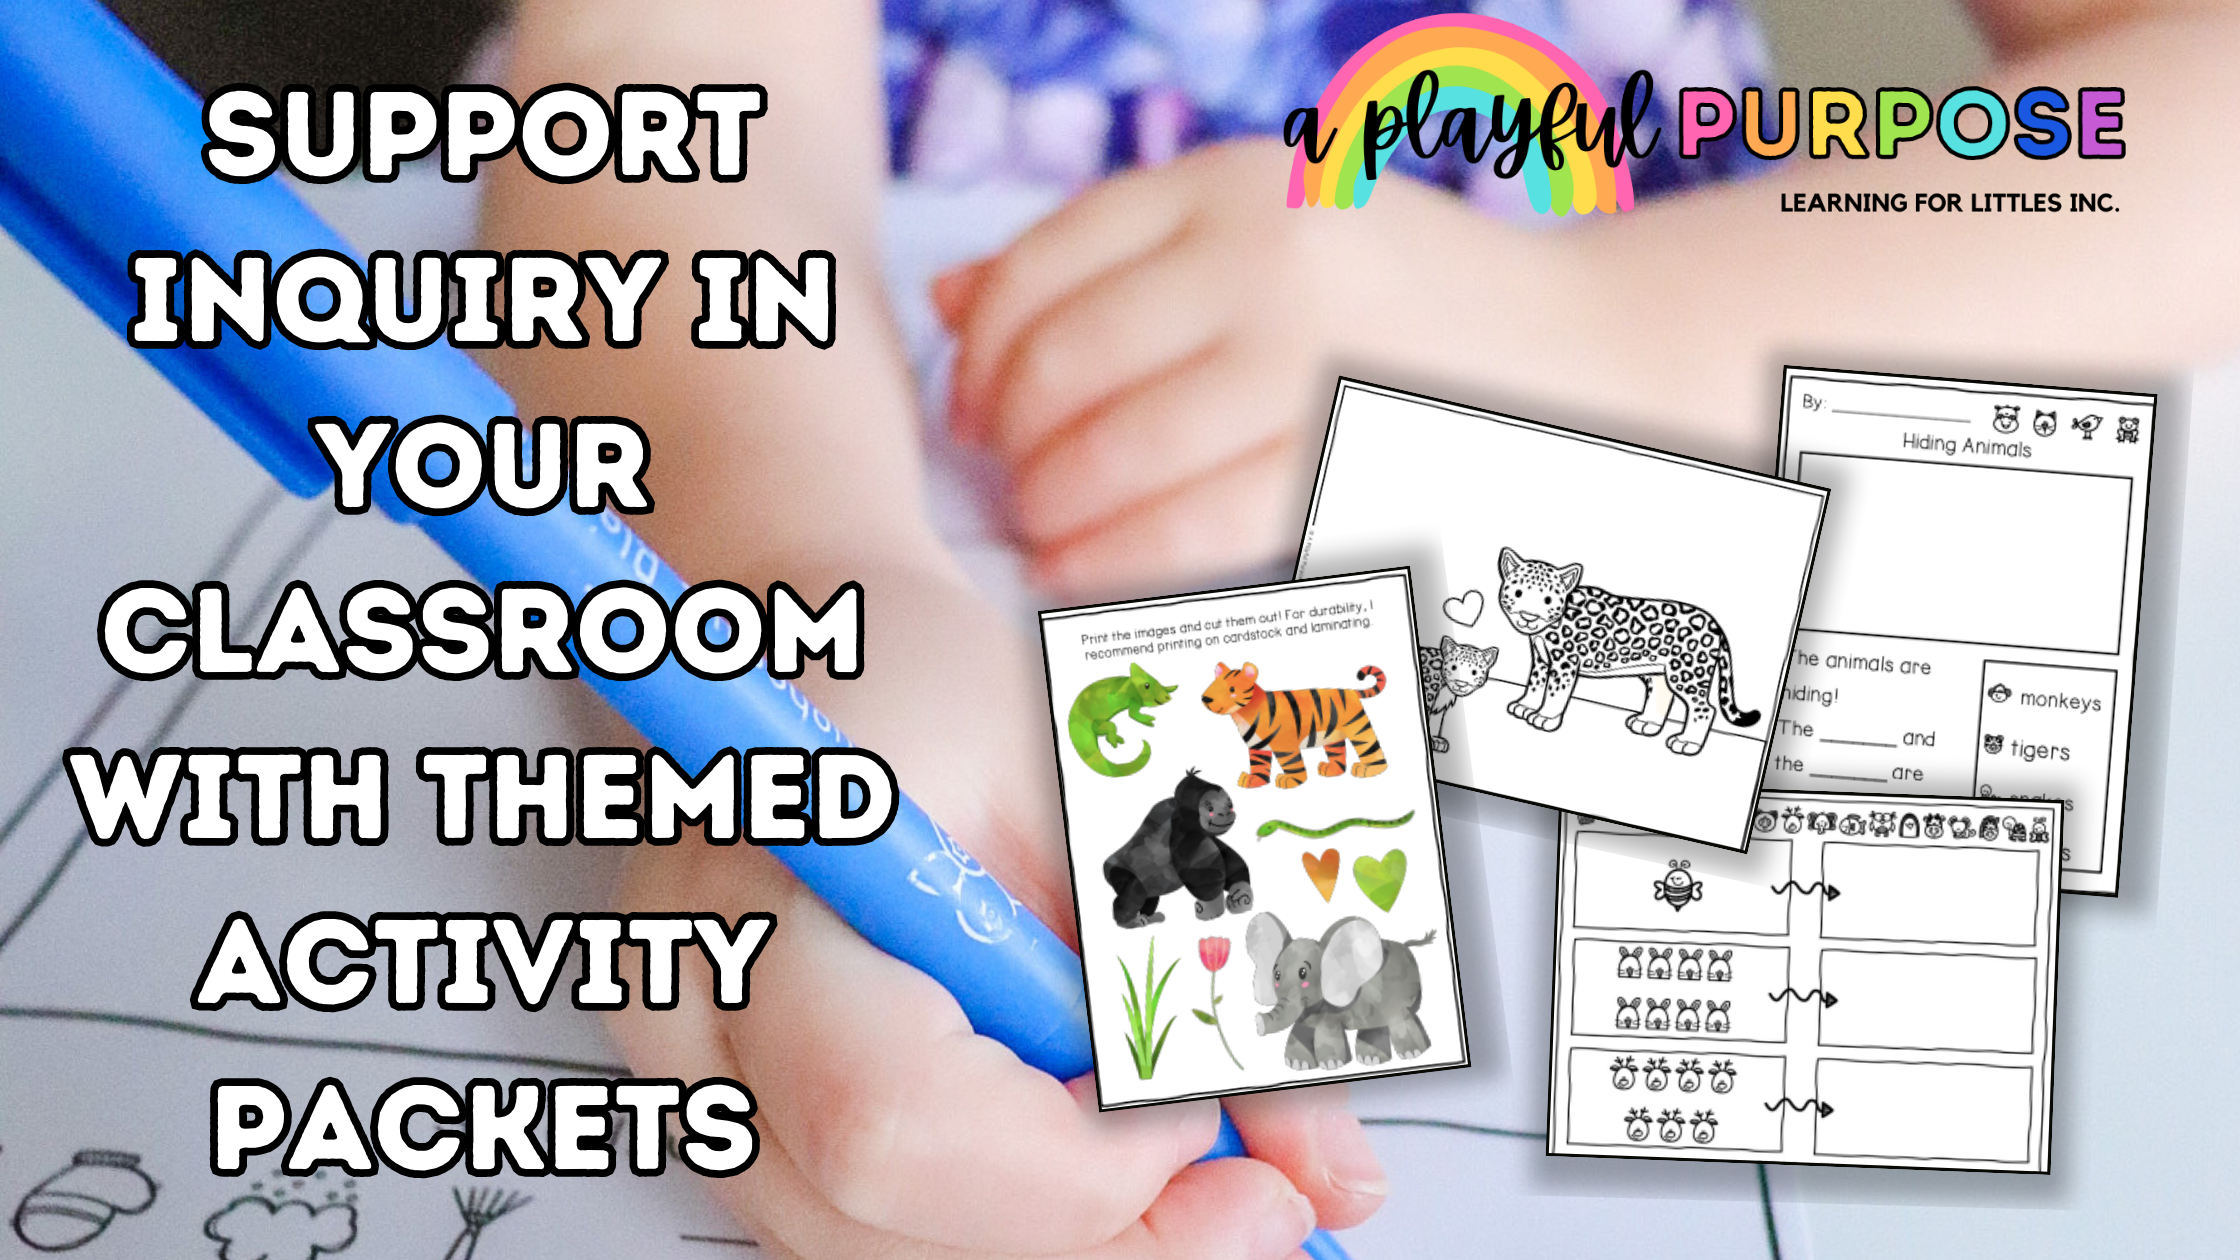 Complete Classroom Art Pack - Play with a Purpose